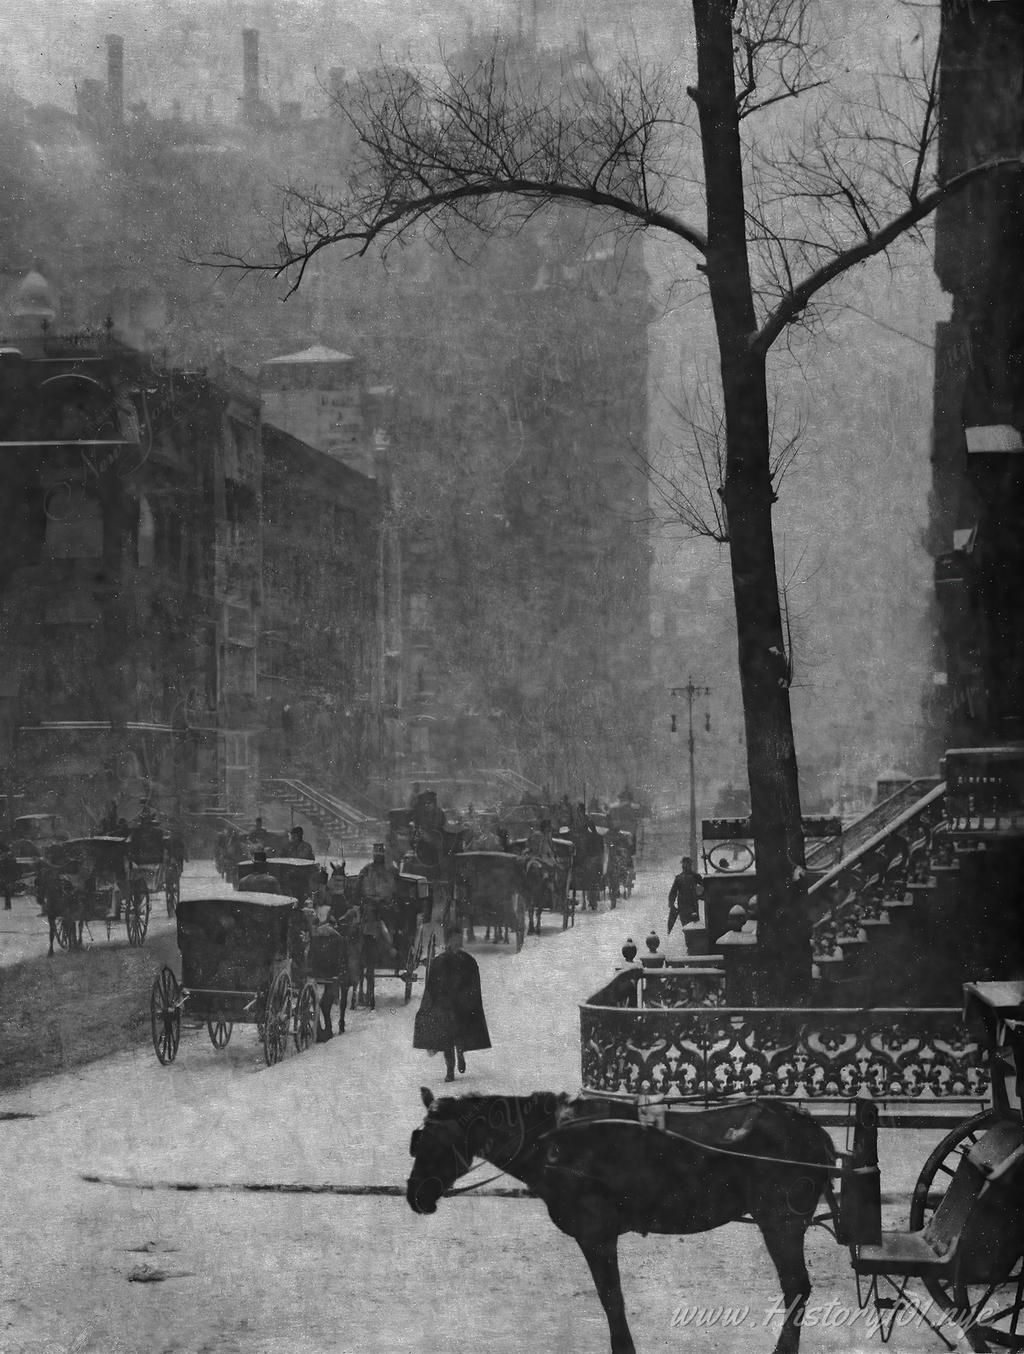 Photograph taken for a poster design of a winter scene looking south on Madison Avenue from 31st Street.